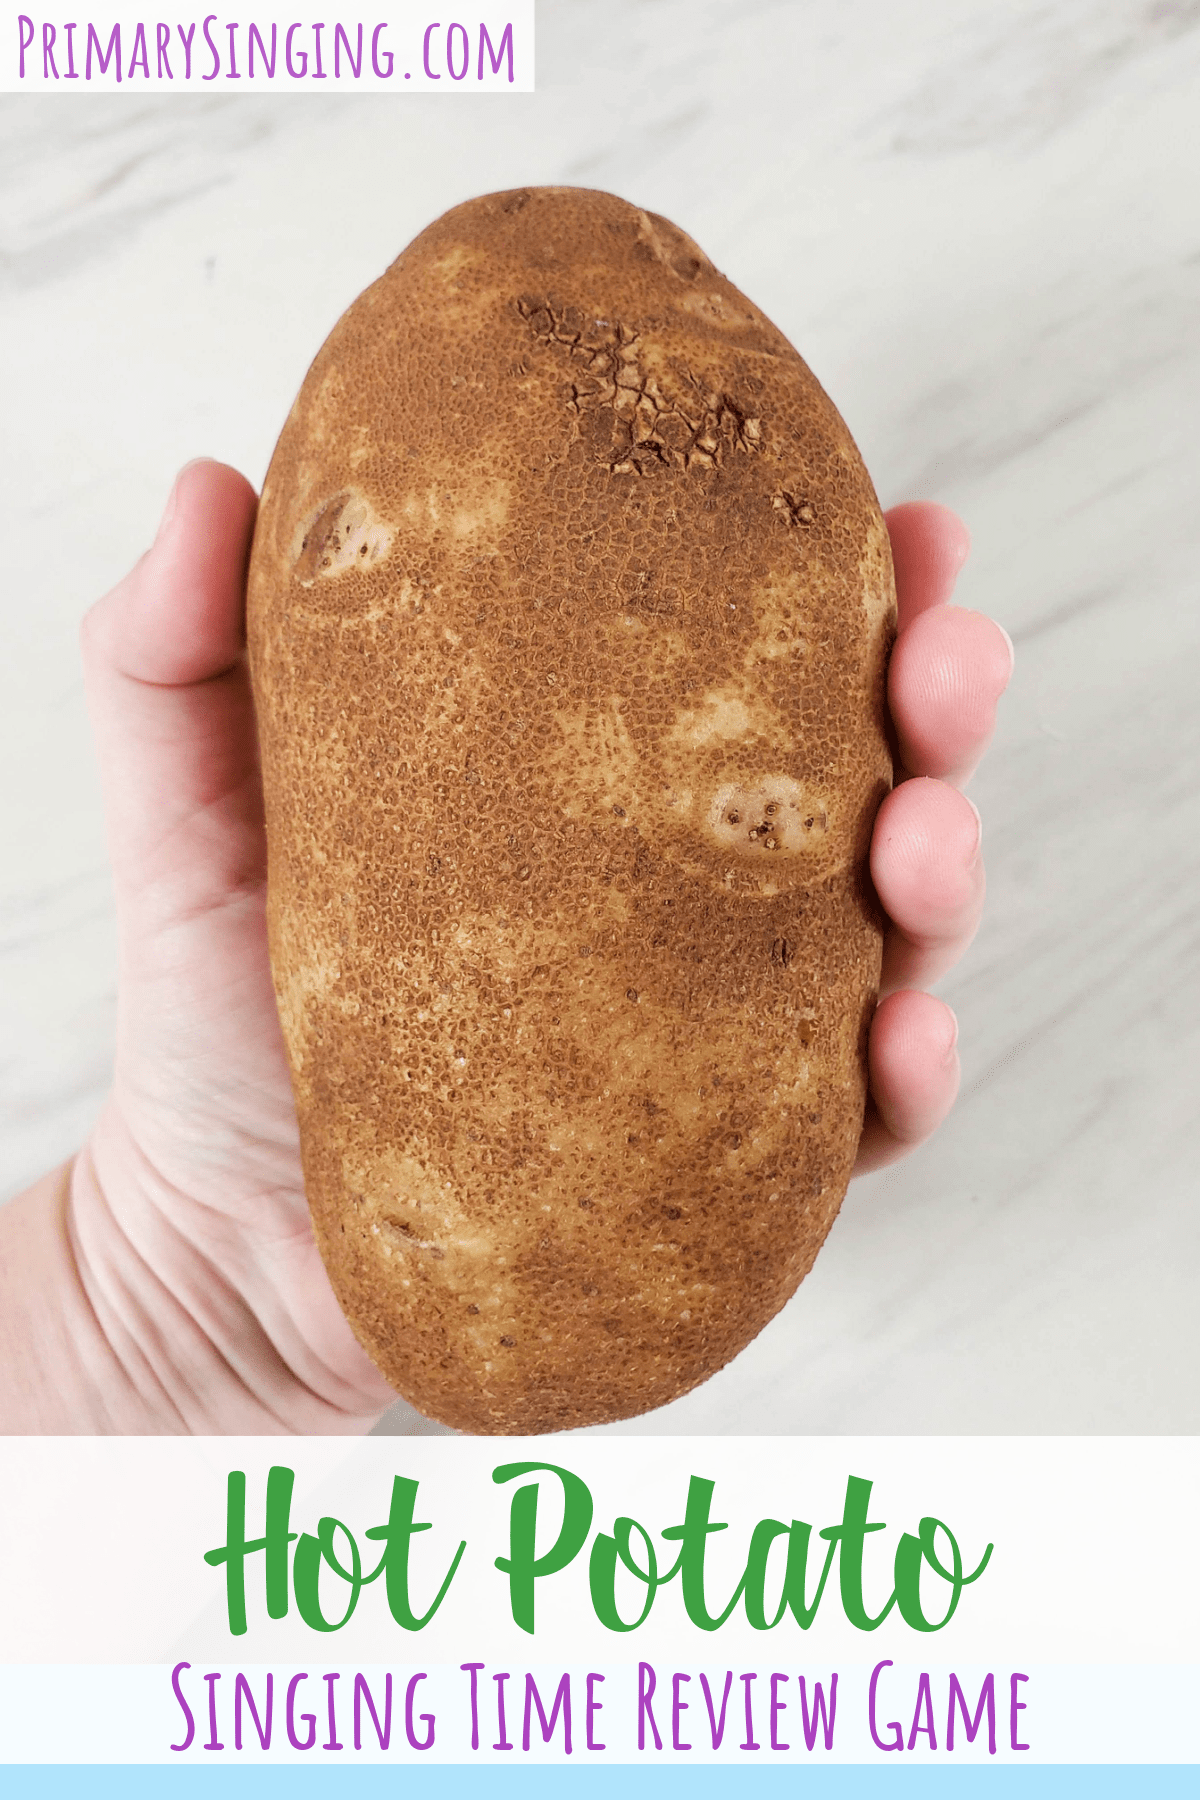 Hot Potato Singing Time Review Game for LDS Primary Music Leaders. Pass the hot potato and if it stop on you, you're out! Plus lots of fun twists on how to play to make it more interactive for music teachers.